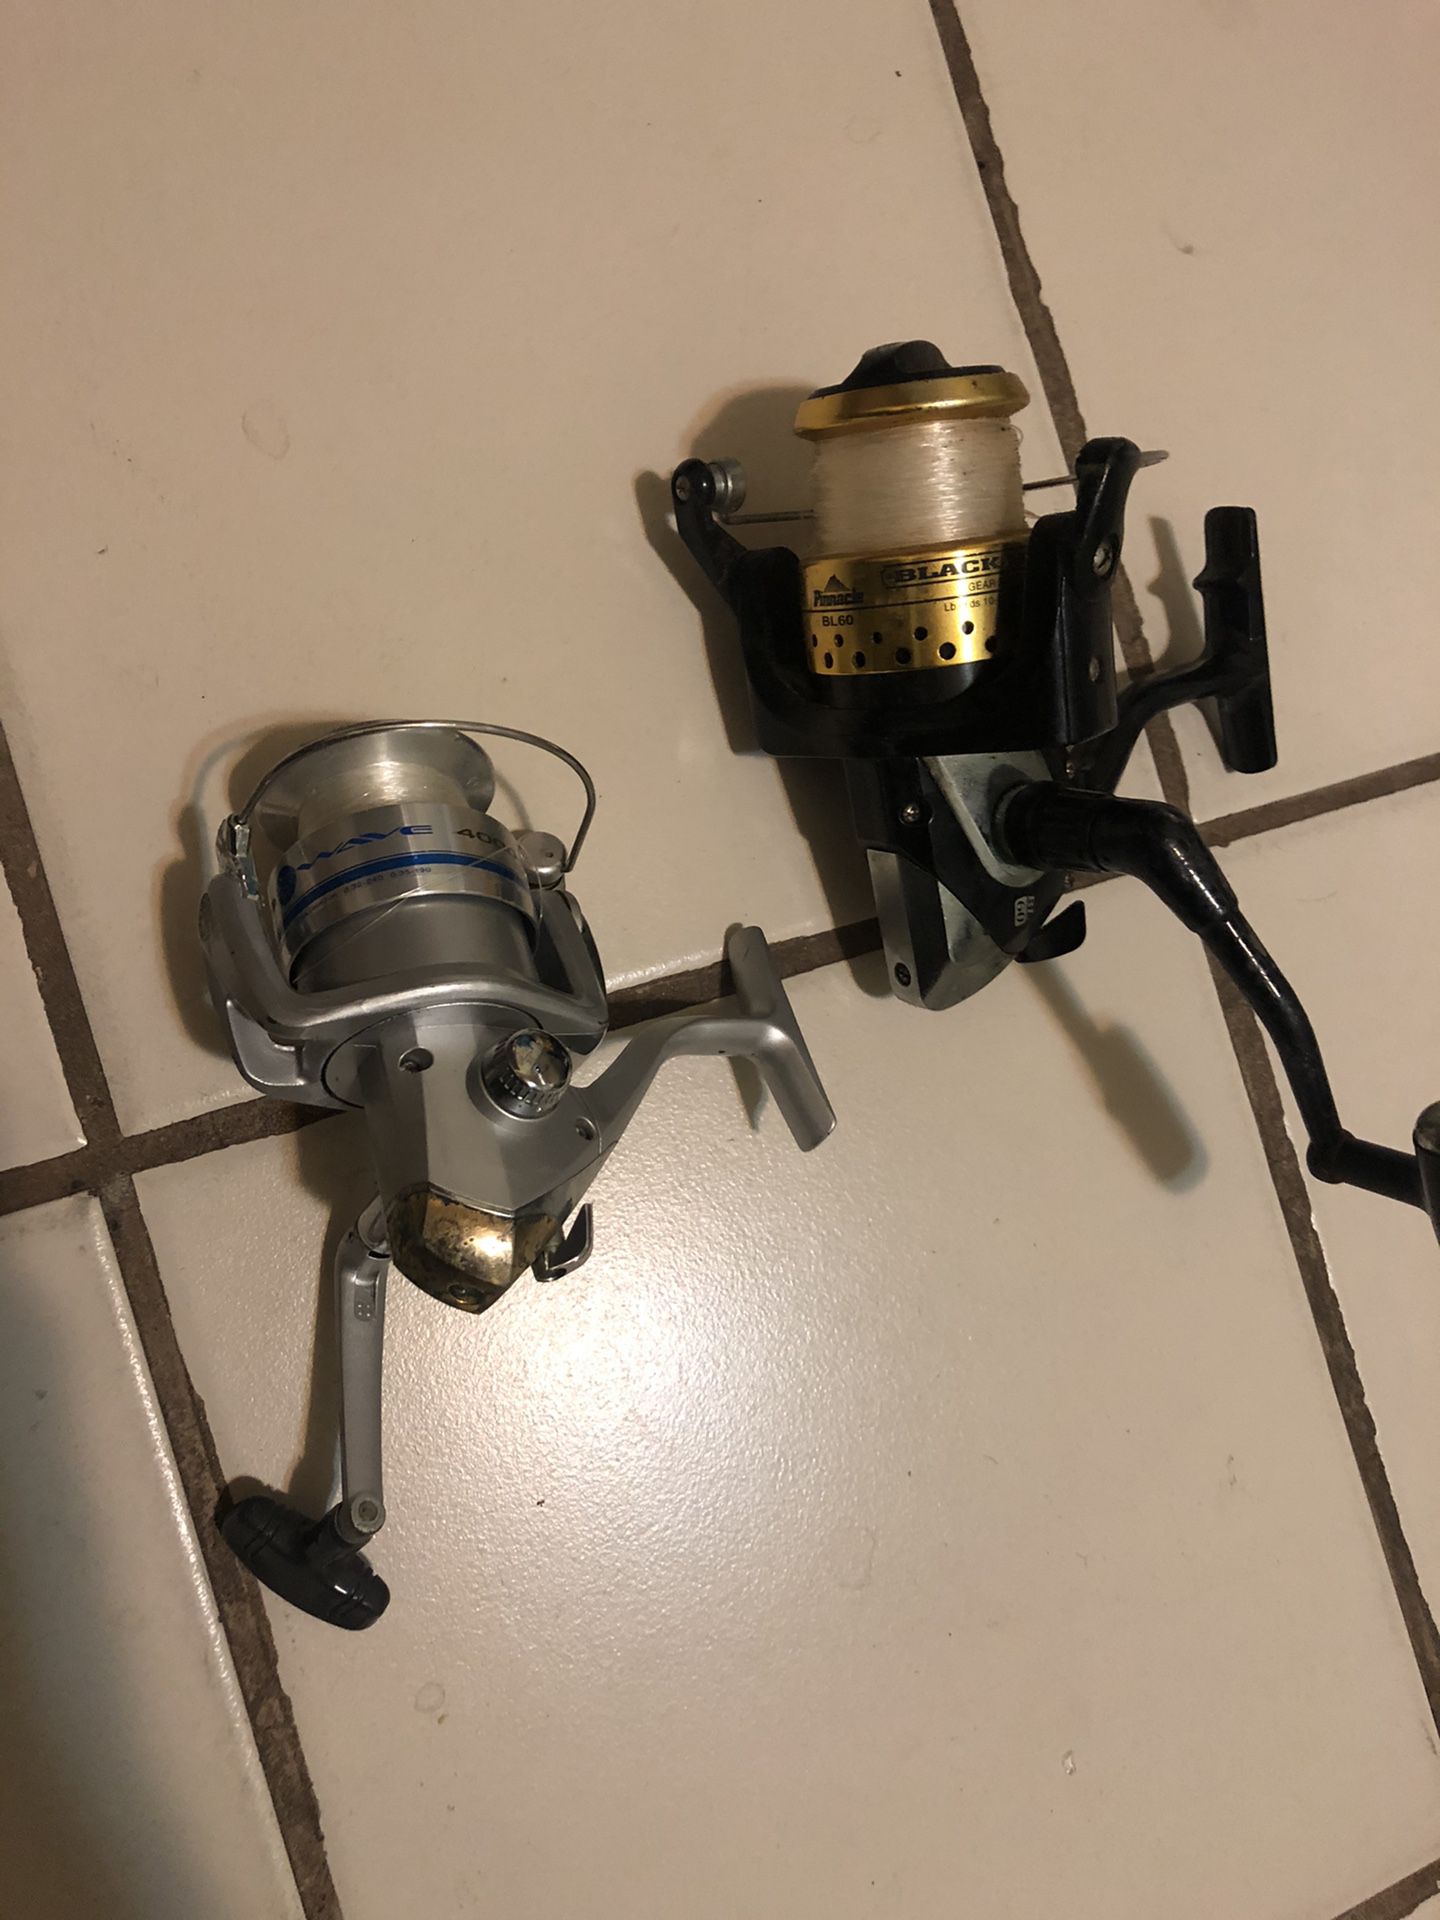 2 Fishing reels for 40$